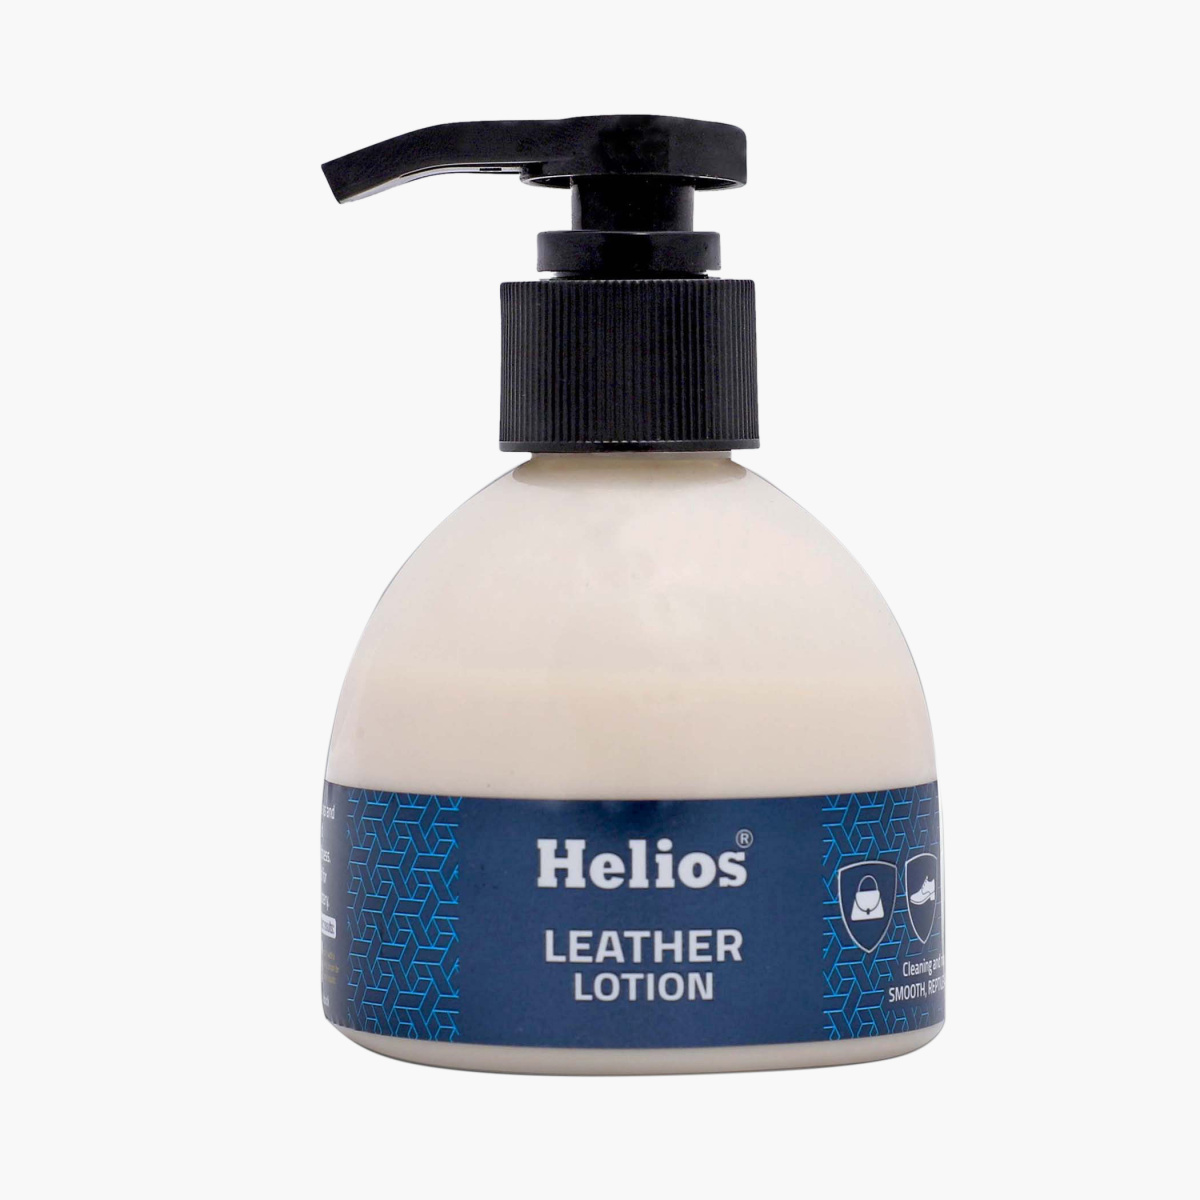 HELIOS Leather Lotion